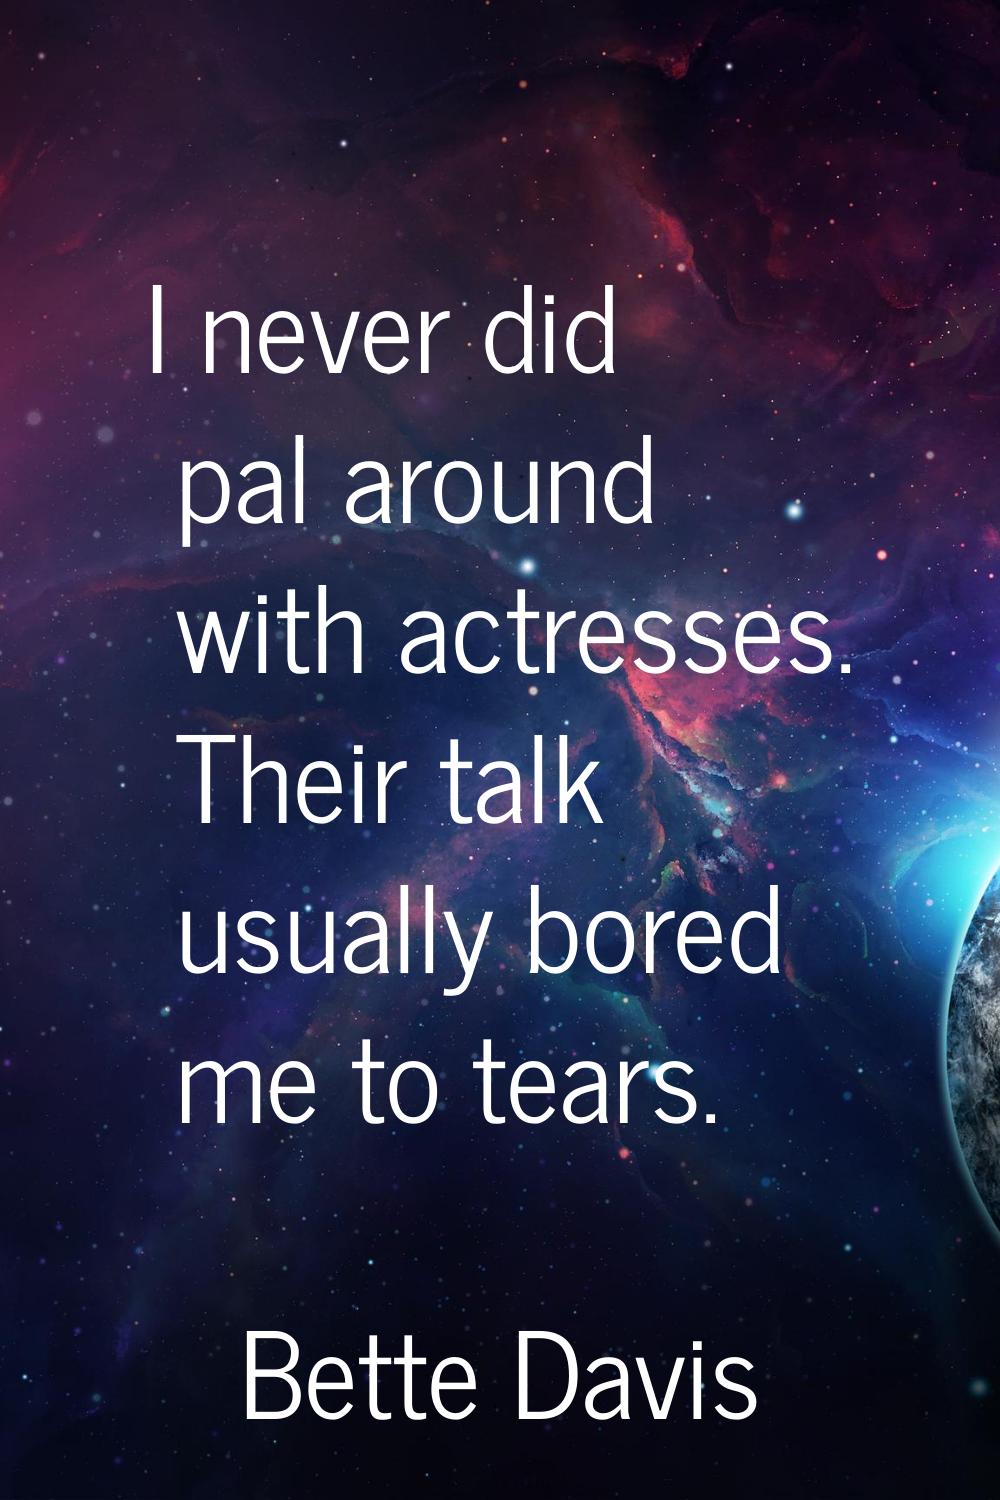 I never did pal around with actresses. Their talk usually bored me to tears.